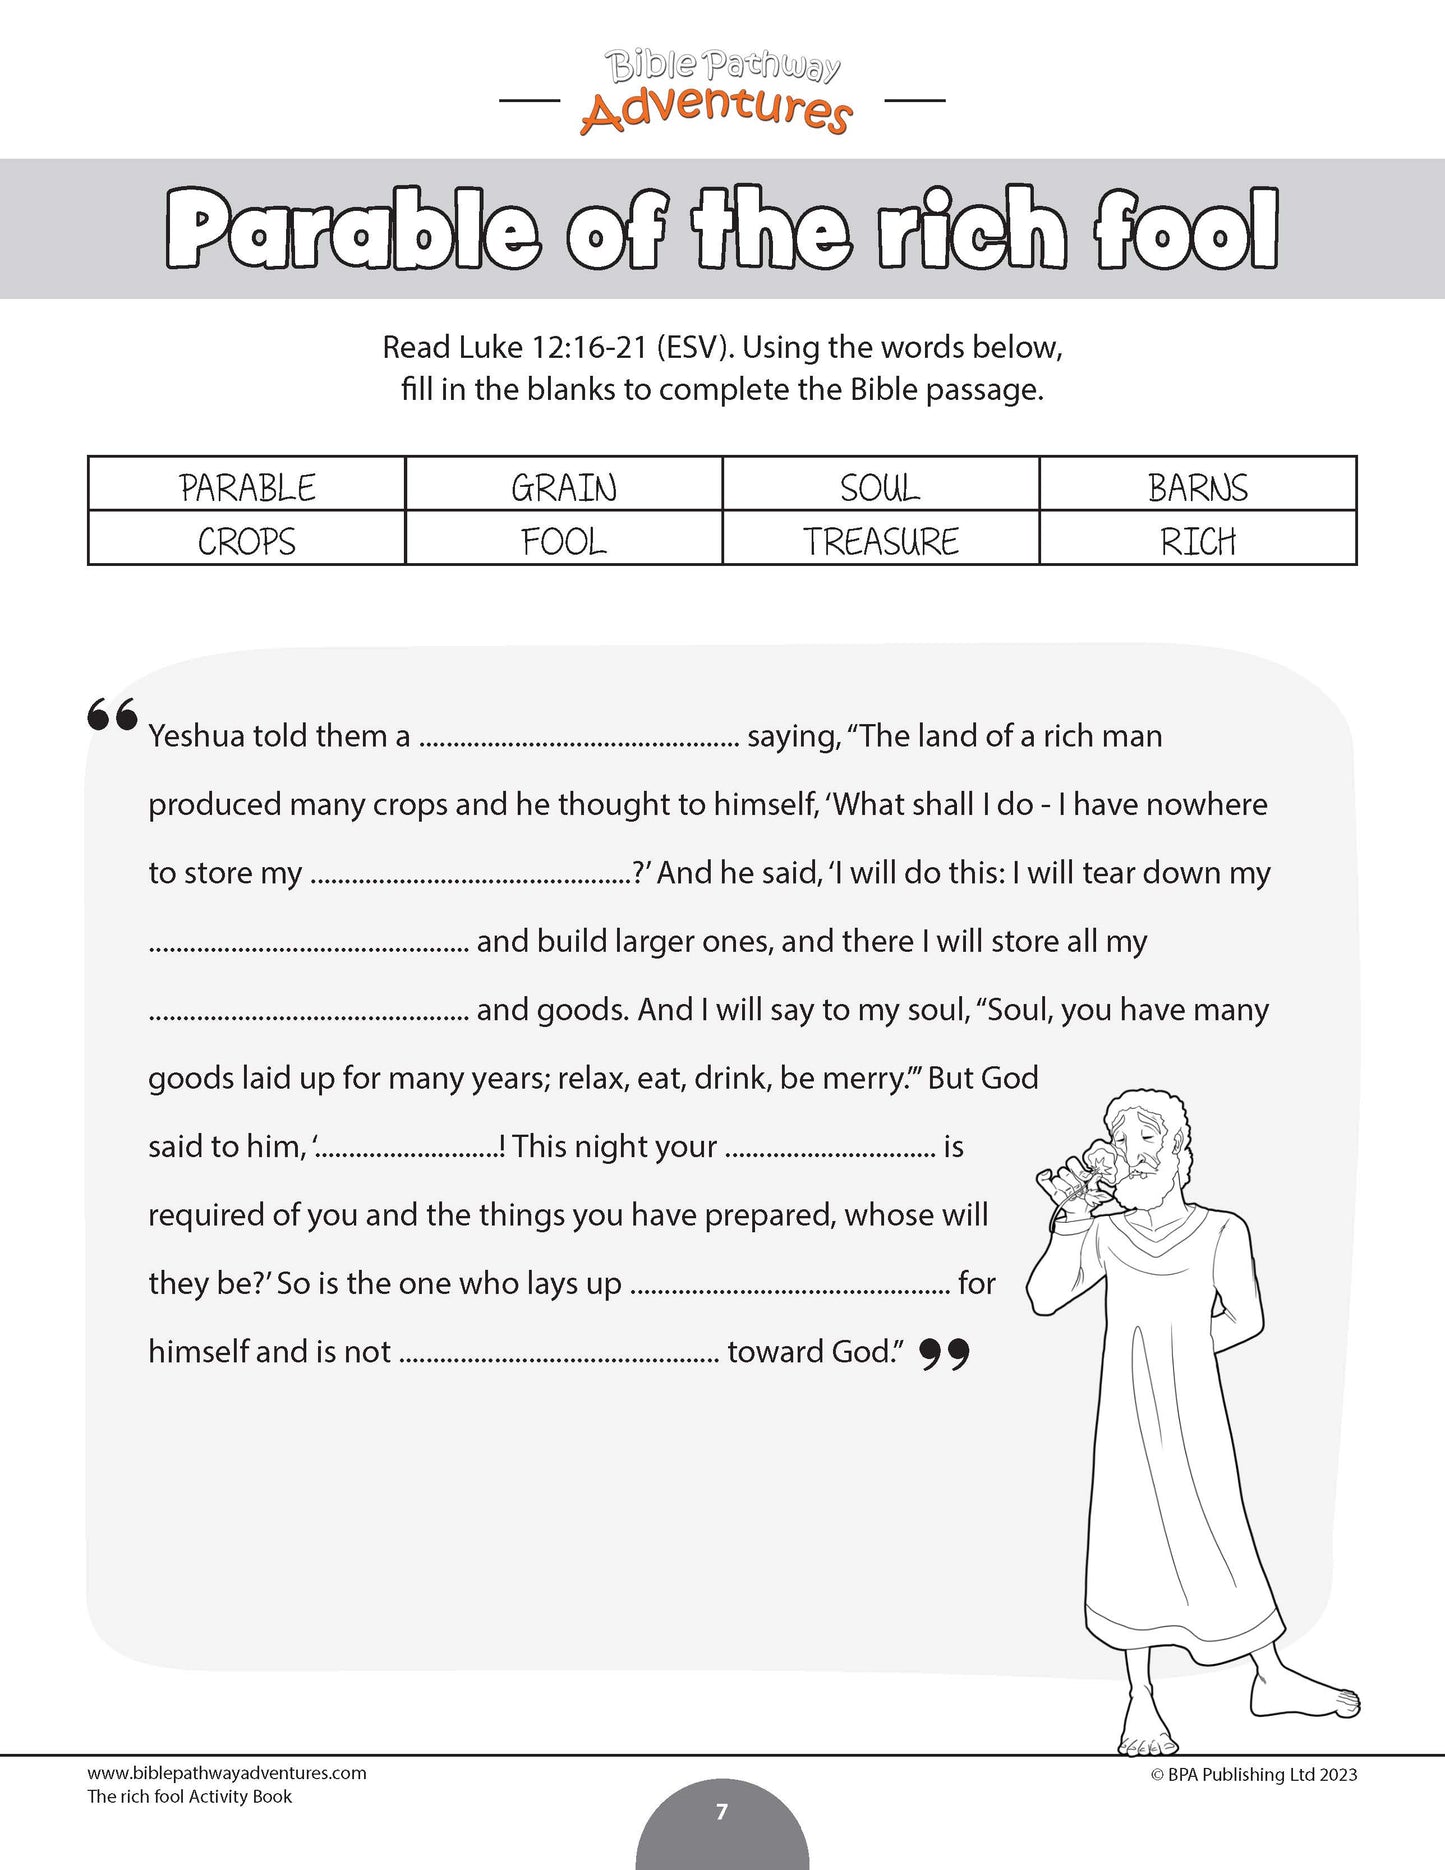 Parable of the Rich Fool Activity Book (PDF)